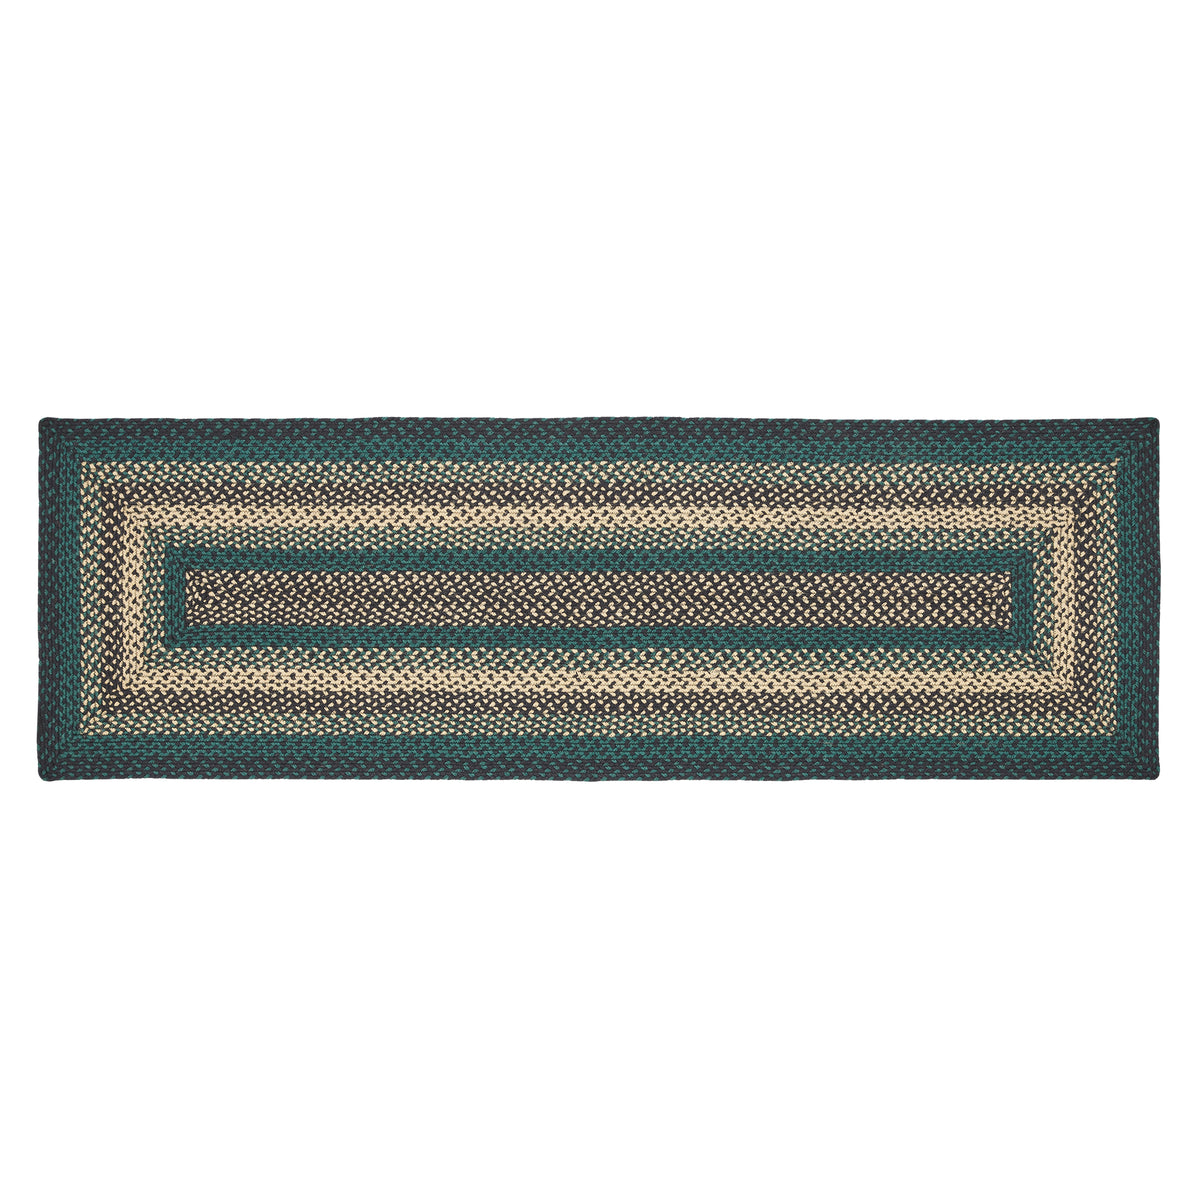 April & Olive Pine Grove Jute Rug/Runner Rect w/ Pad 24x96 By VHC Brands